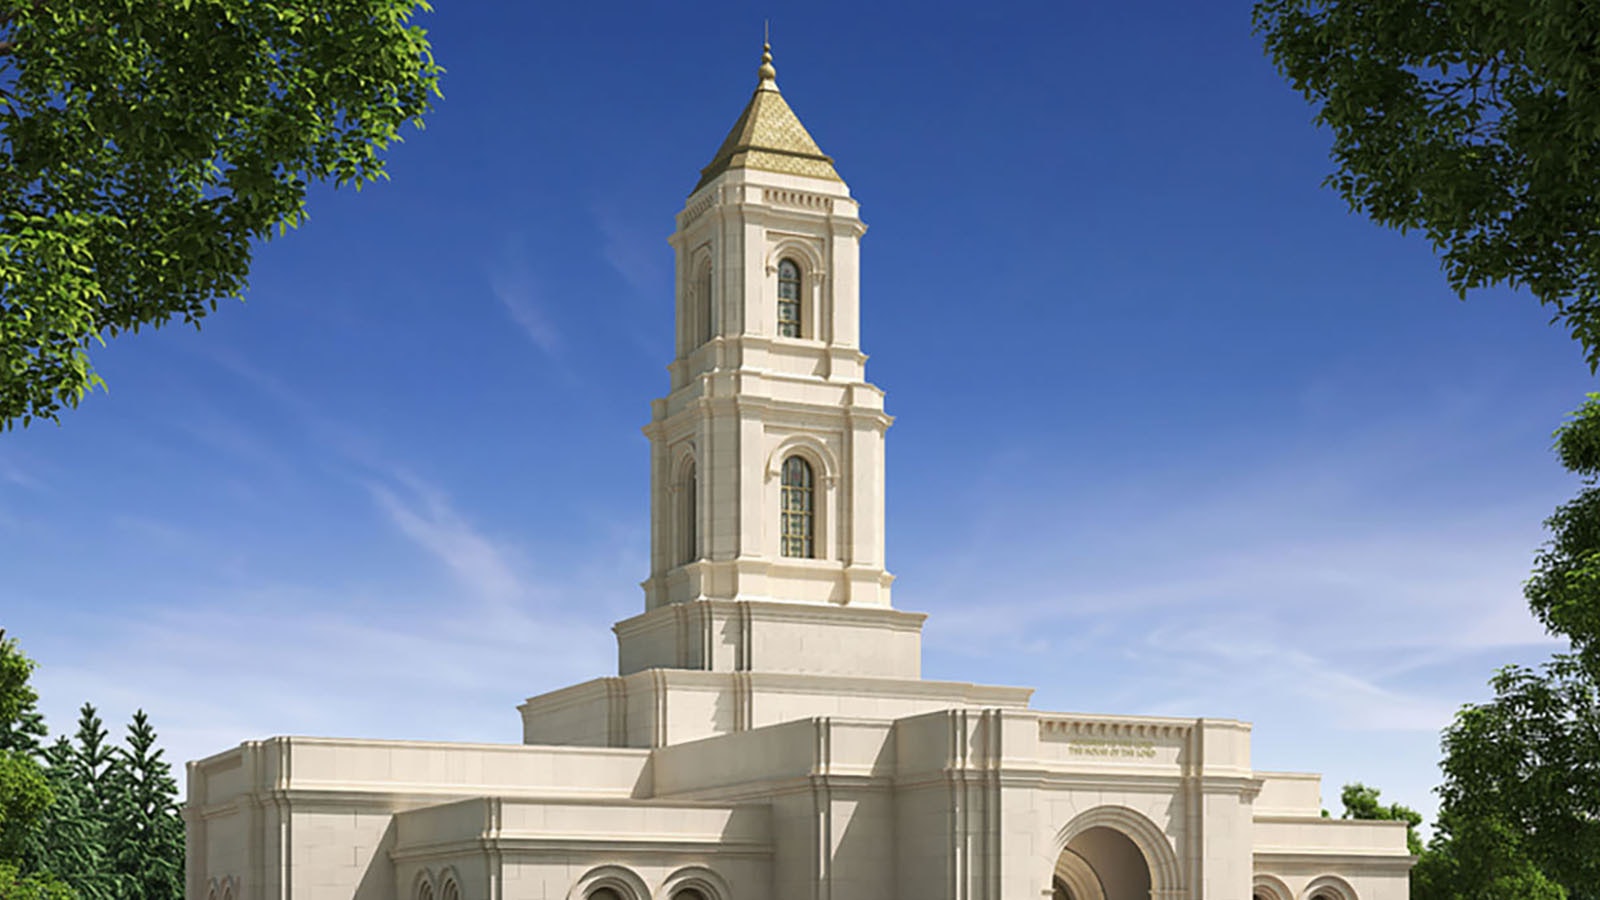 After months of discussions, meetings and protests, the original plan for a Church of Jesus Christ of Latter-day Saints temple in Cody is good to go, including a controversial 77-foot steeple.